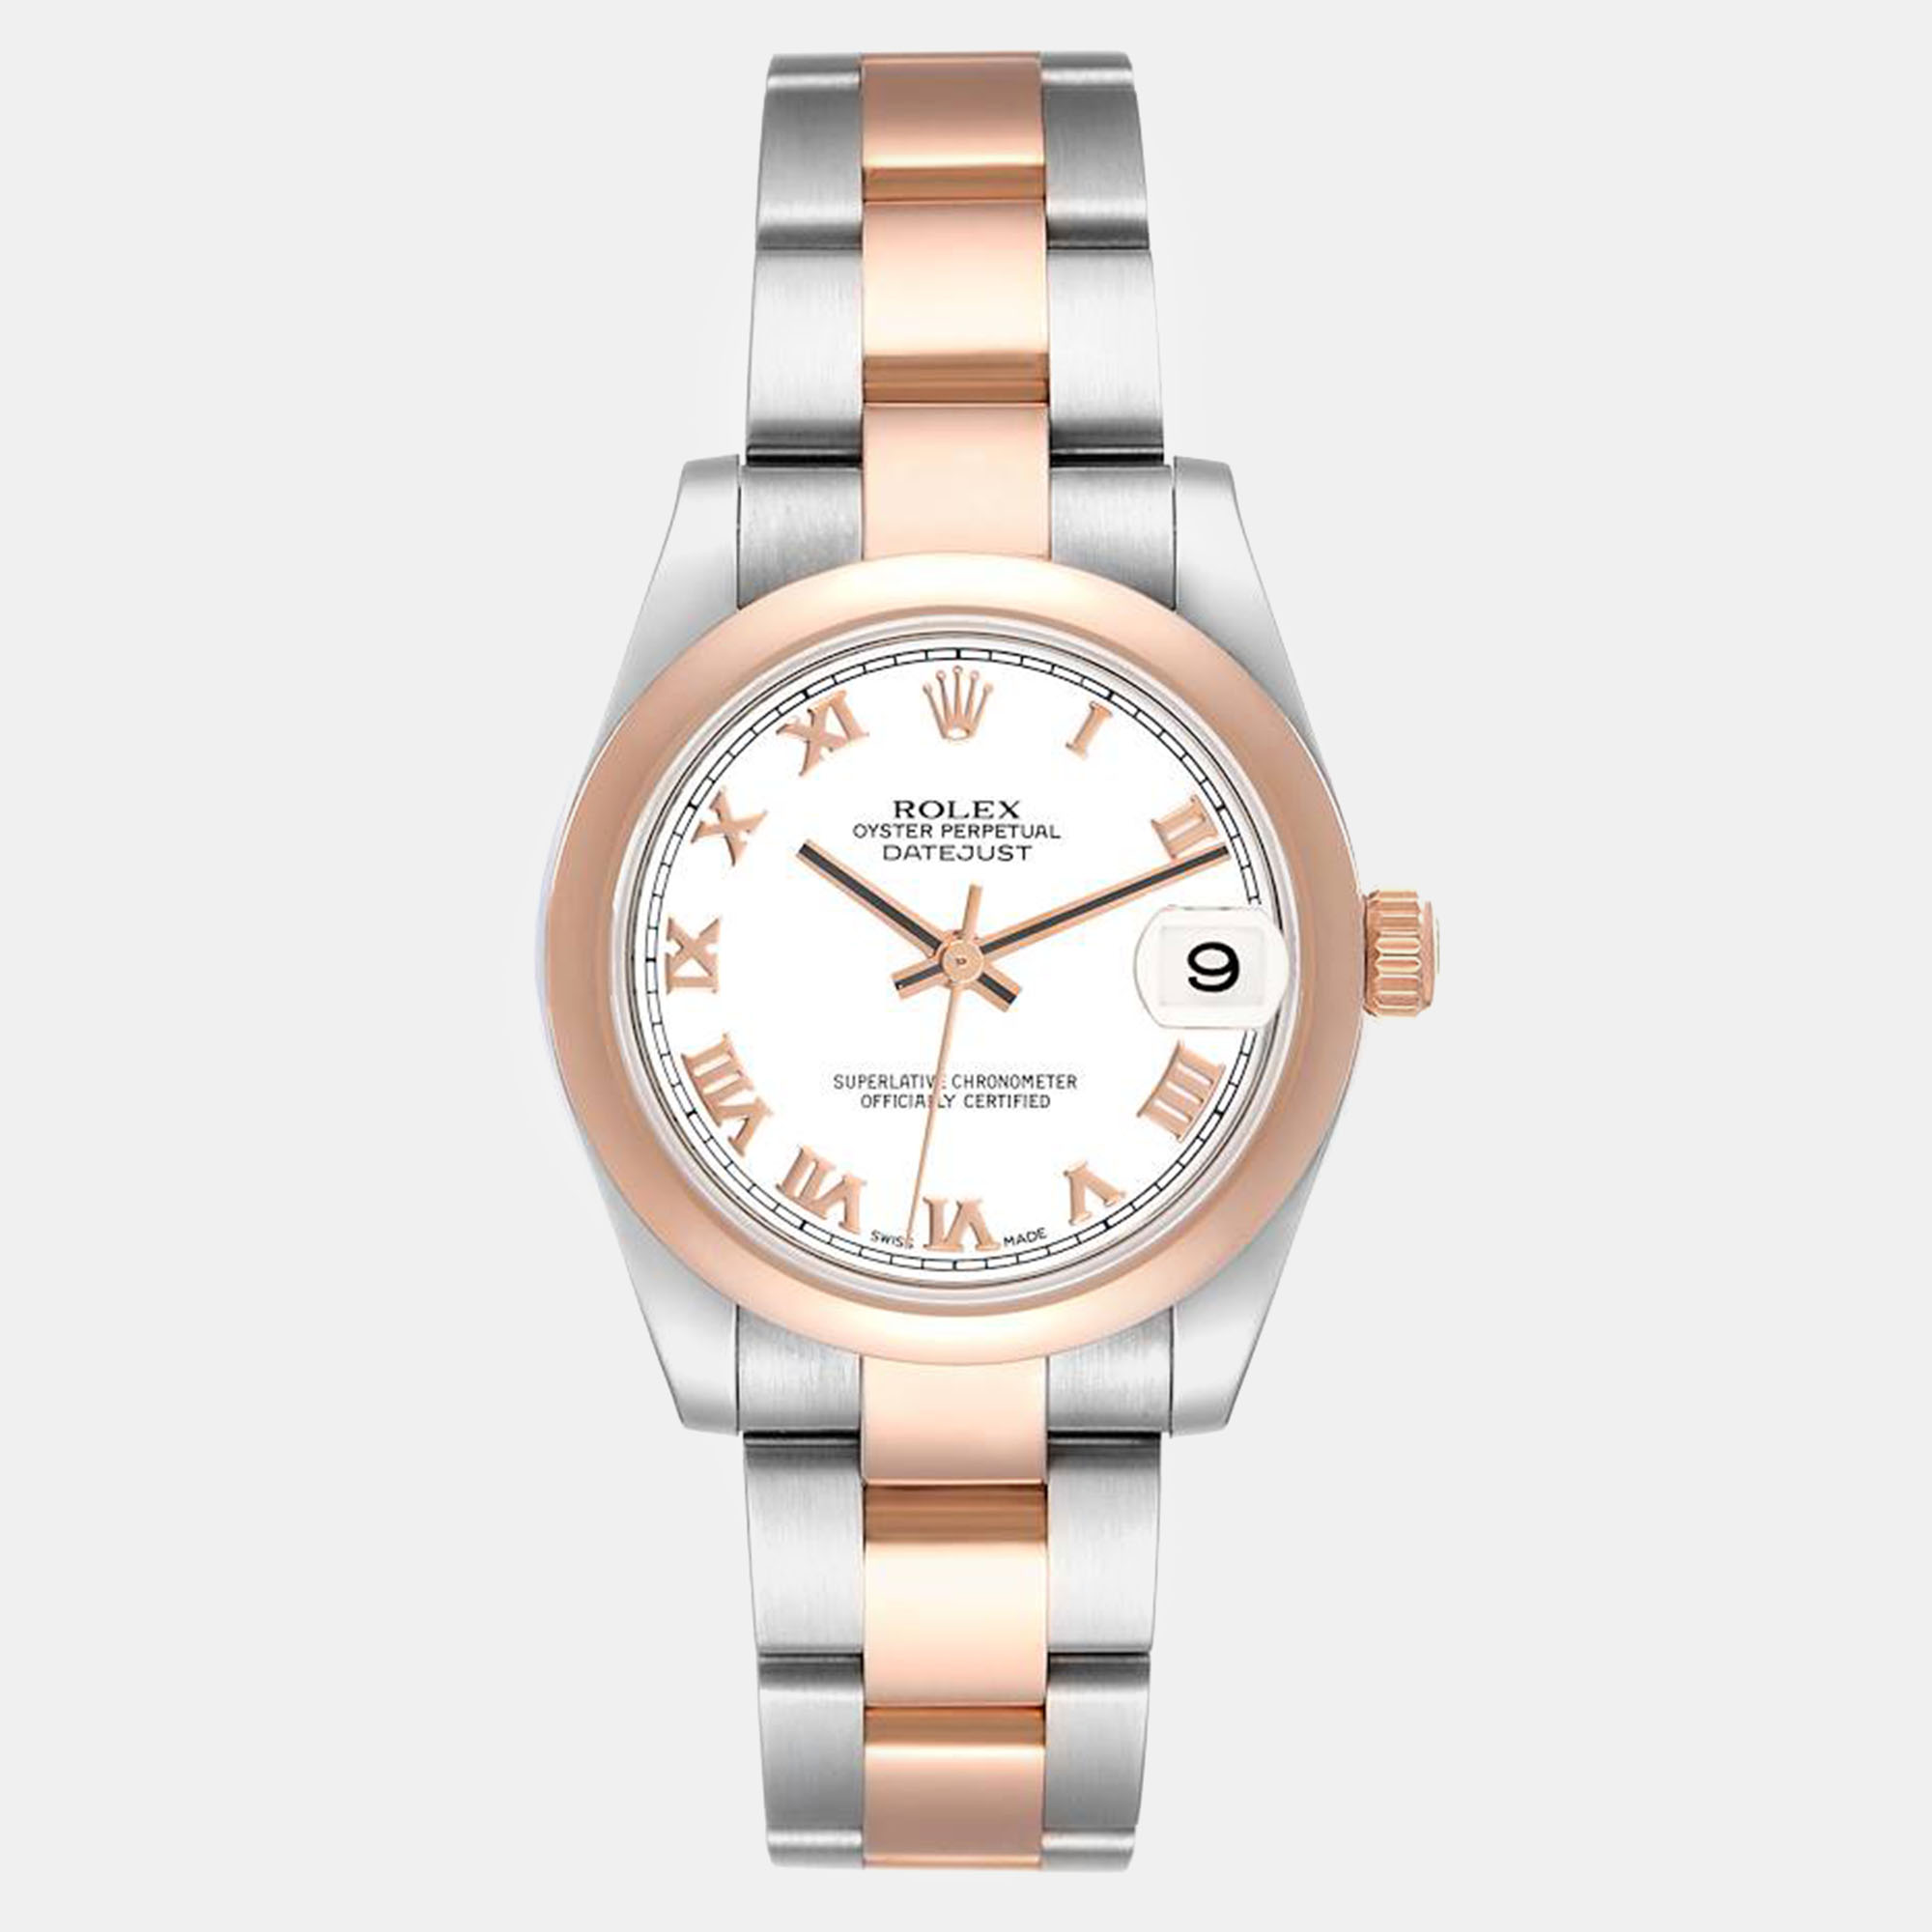 Rolex datejust midsize steel rose gold white dial ladies watch 31 mm